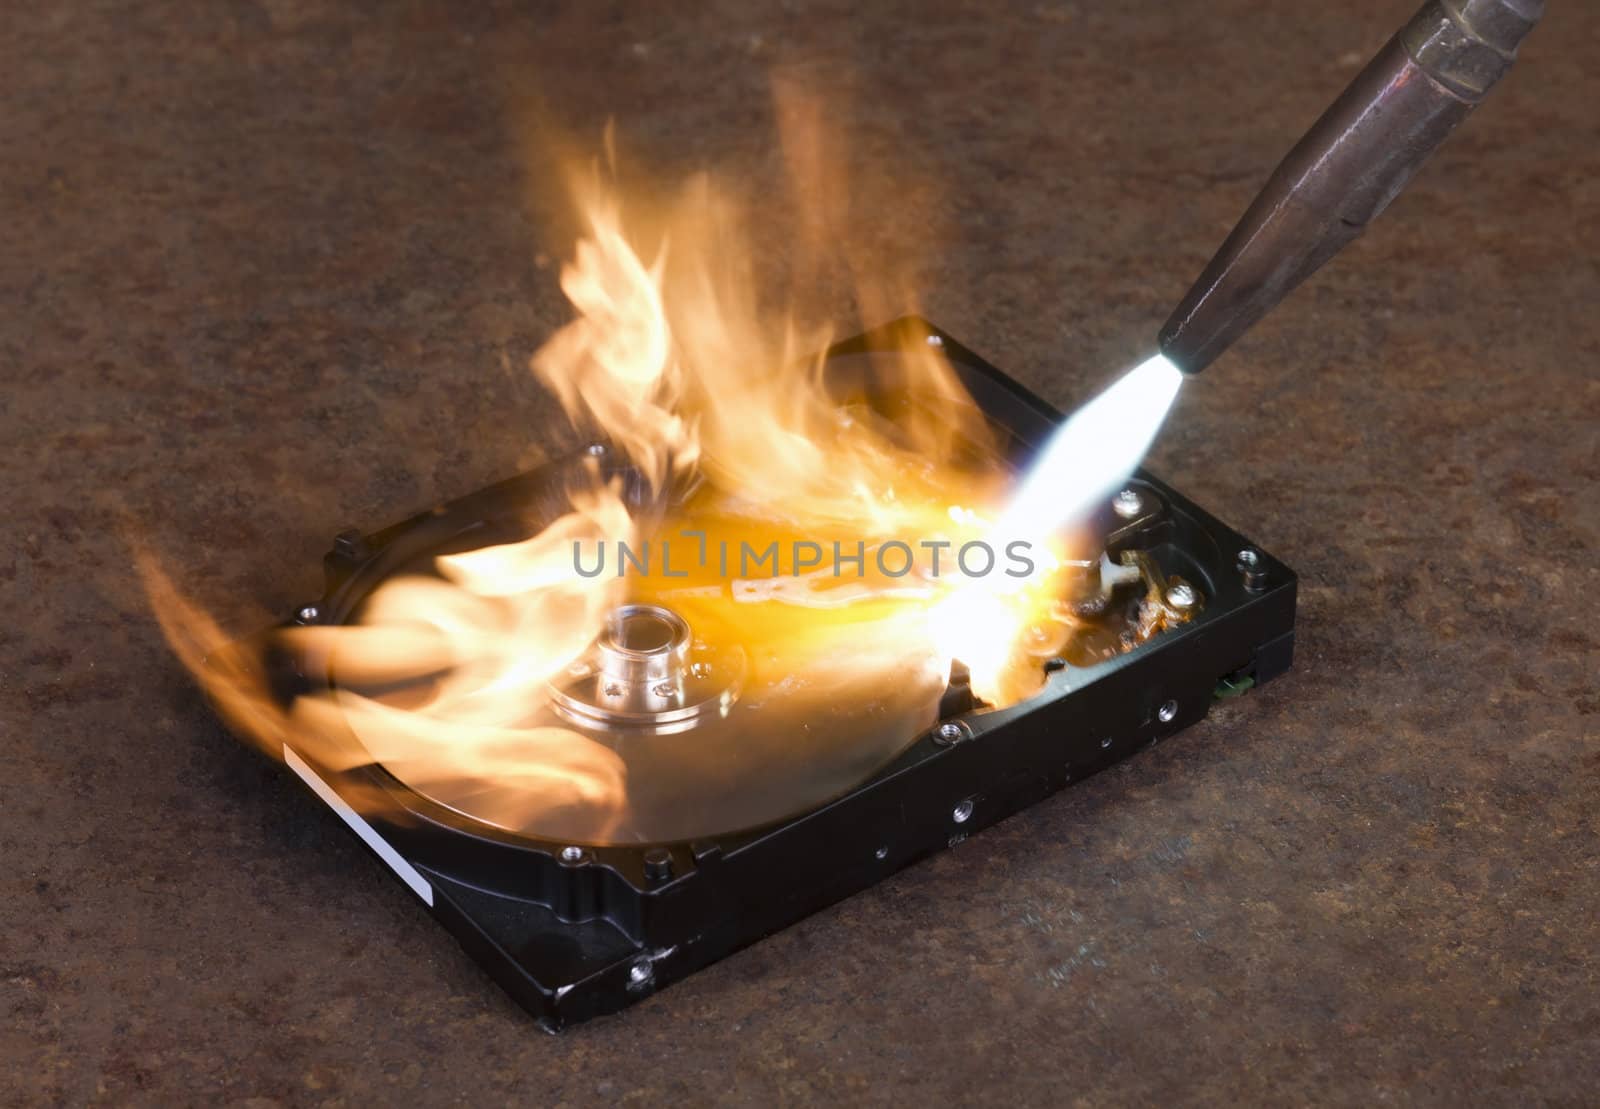 burning a hard disk drive with a welding torch in rusty background